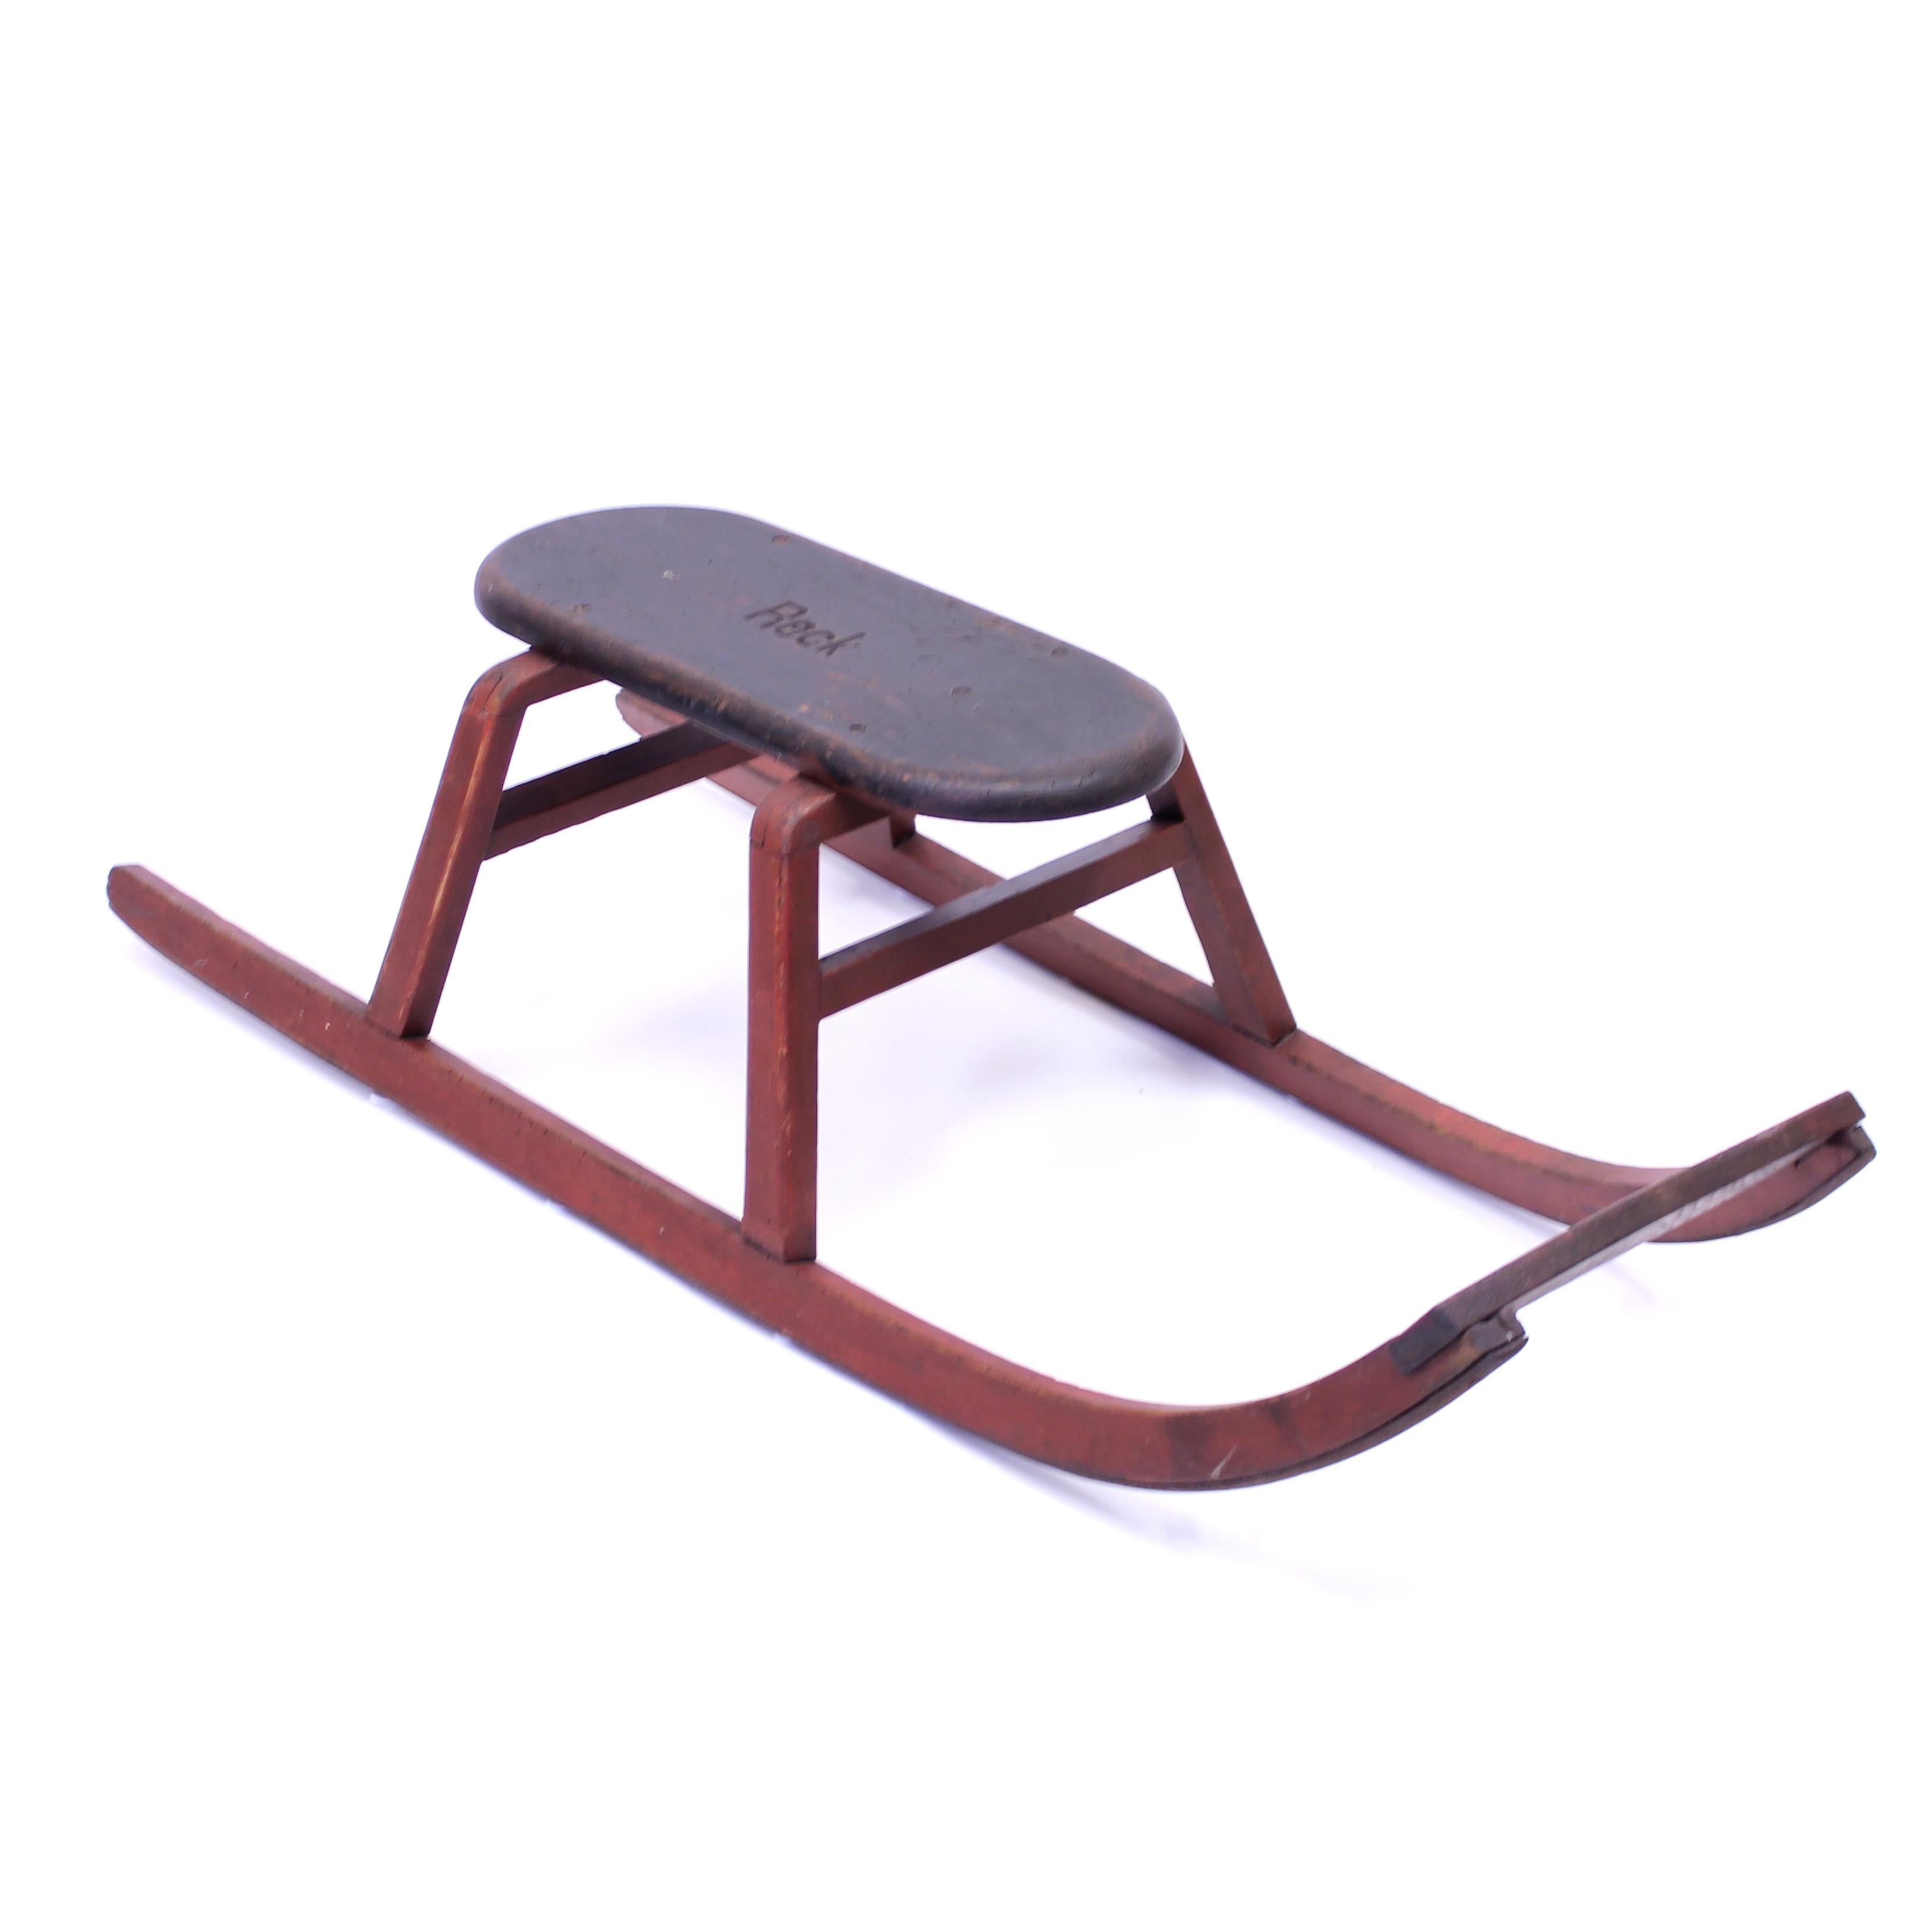 Wooden sled with metal runners under the rockers. The legs and rockers have the original red paint and the seat has its original dark stained wood with very honest and attractive patina from years of use. The seat is marked RECK. It contains normal